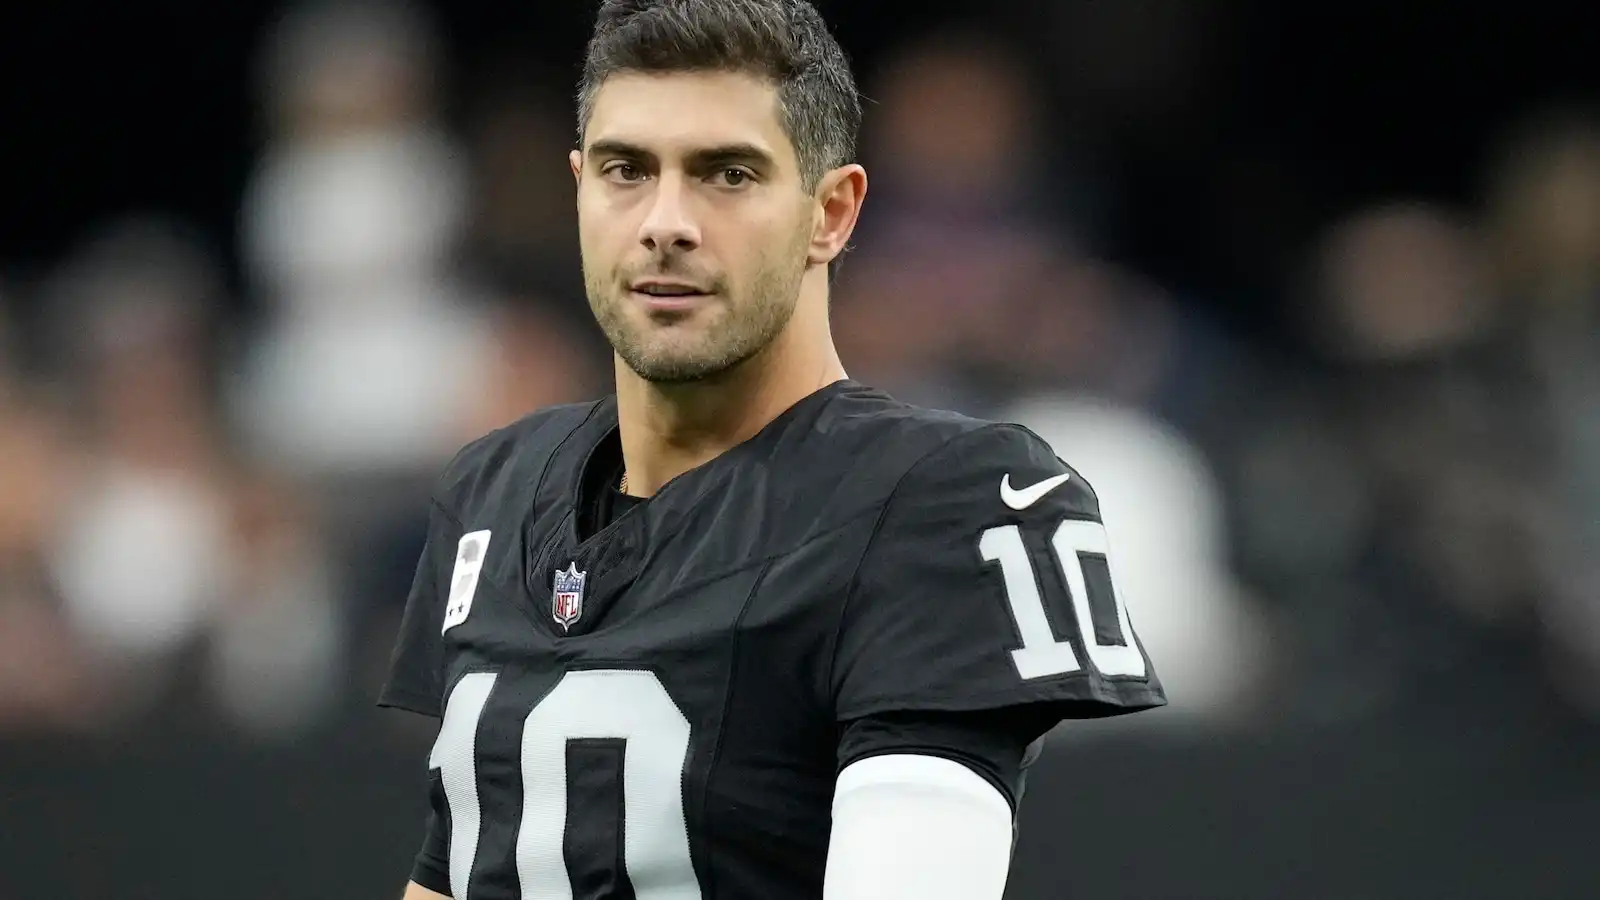 Raiders release Jimmy Garoppolo and Hunter Renfrow to cut costs